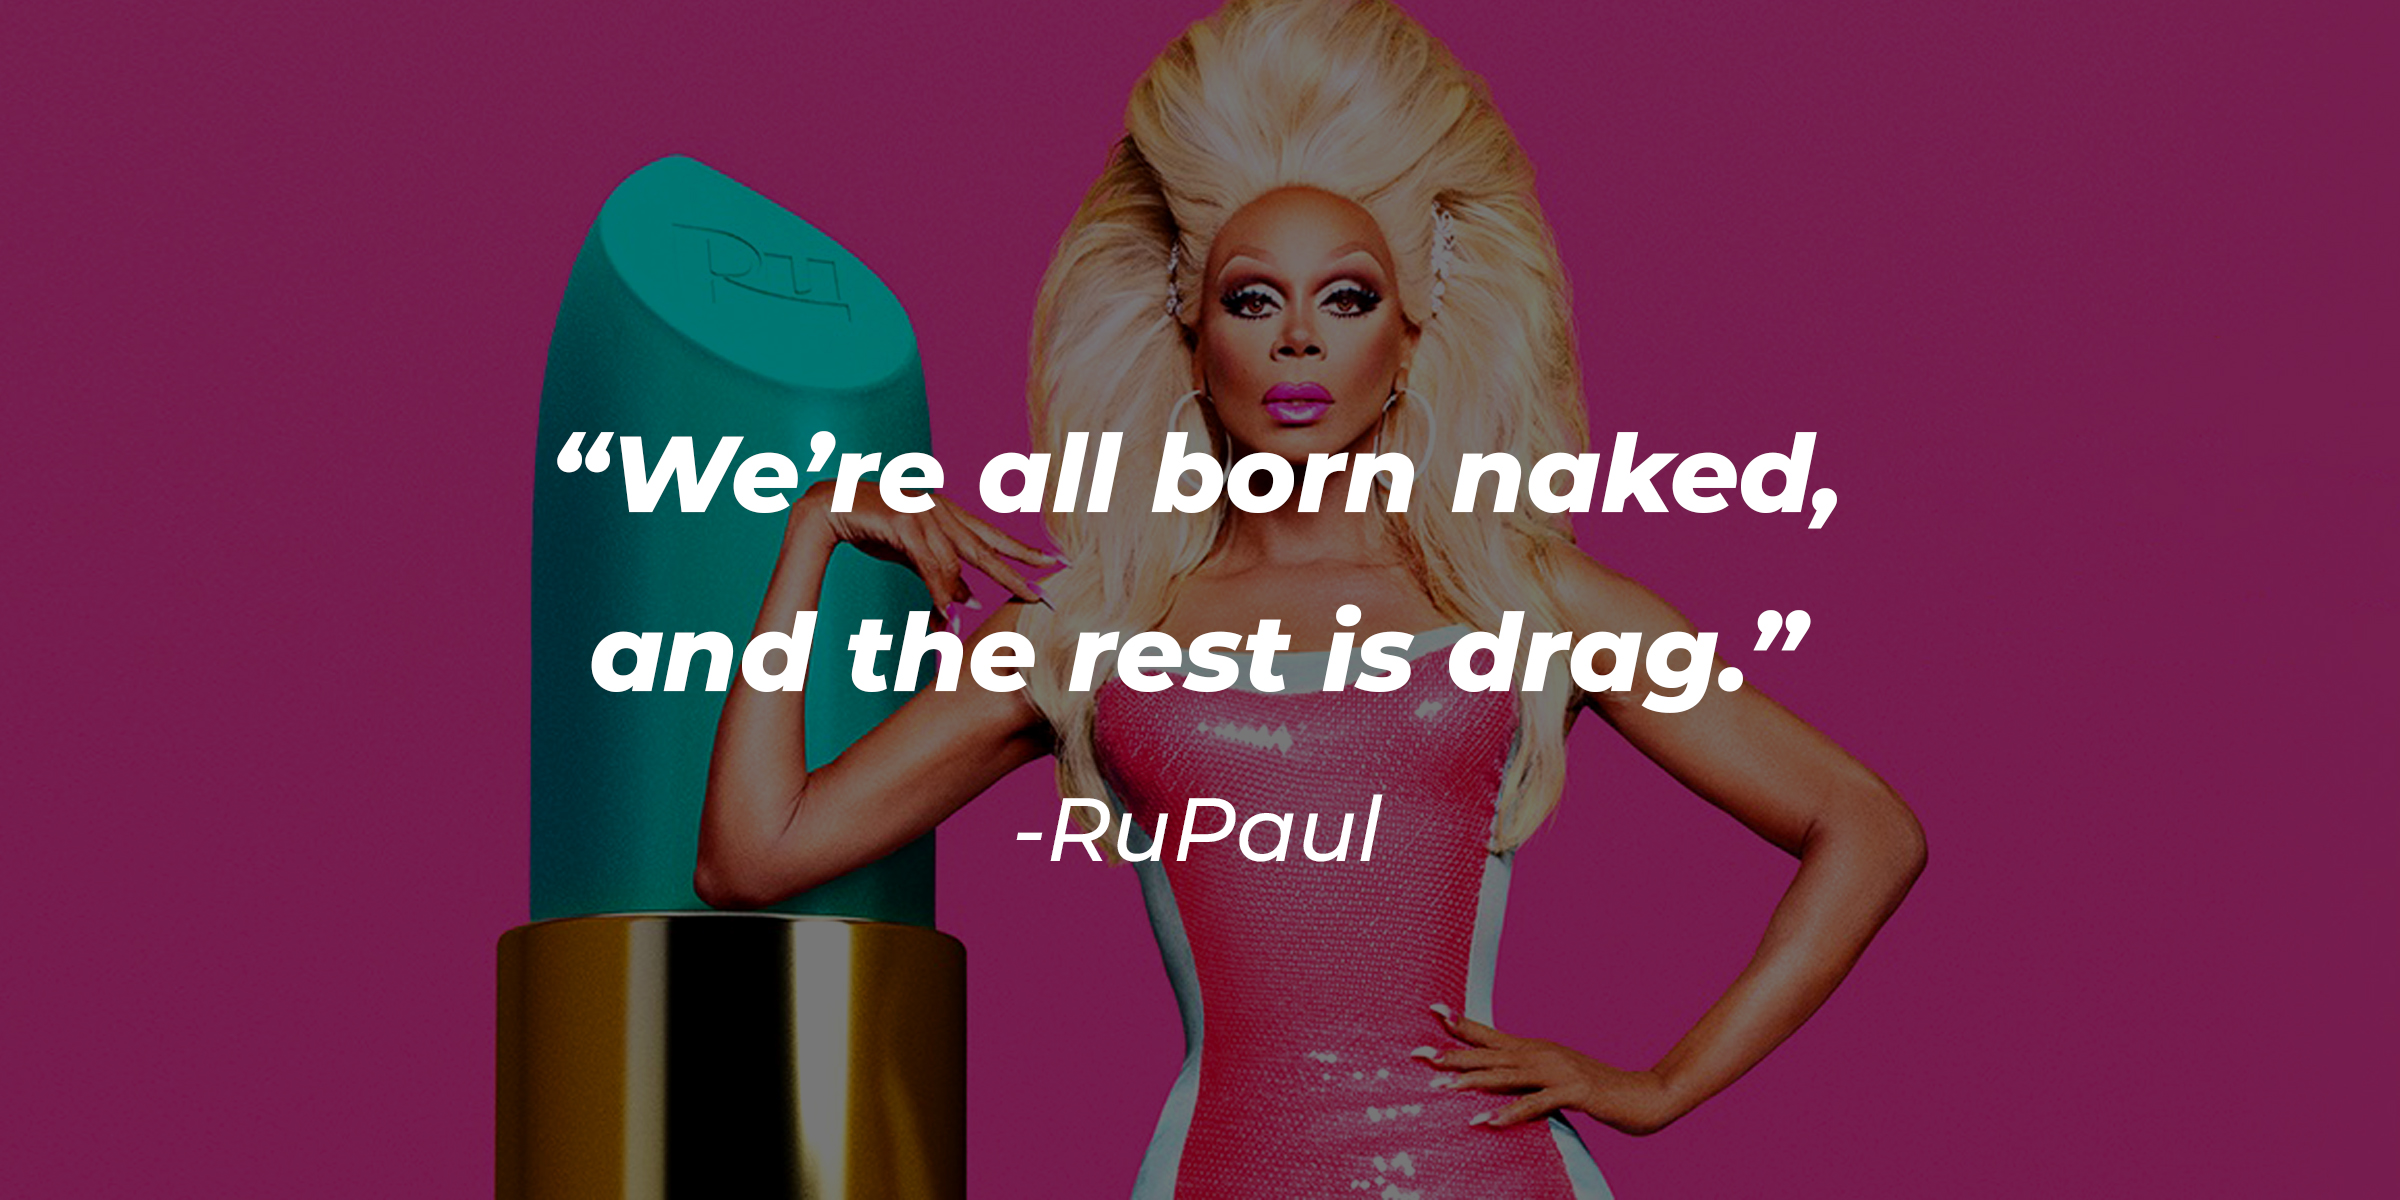 An image of RuPaul, with his quote: “We’re all born naked, and the rest is drag.” | Source: Facebook.com/rupaulsdragrace